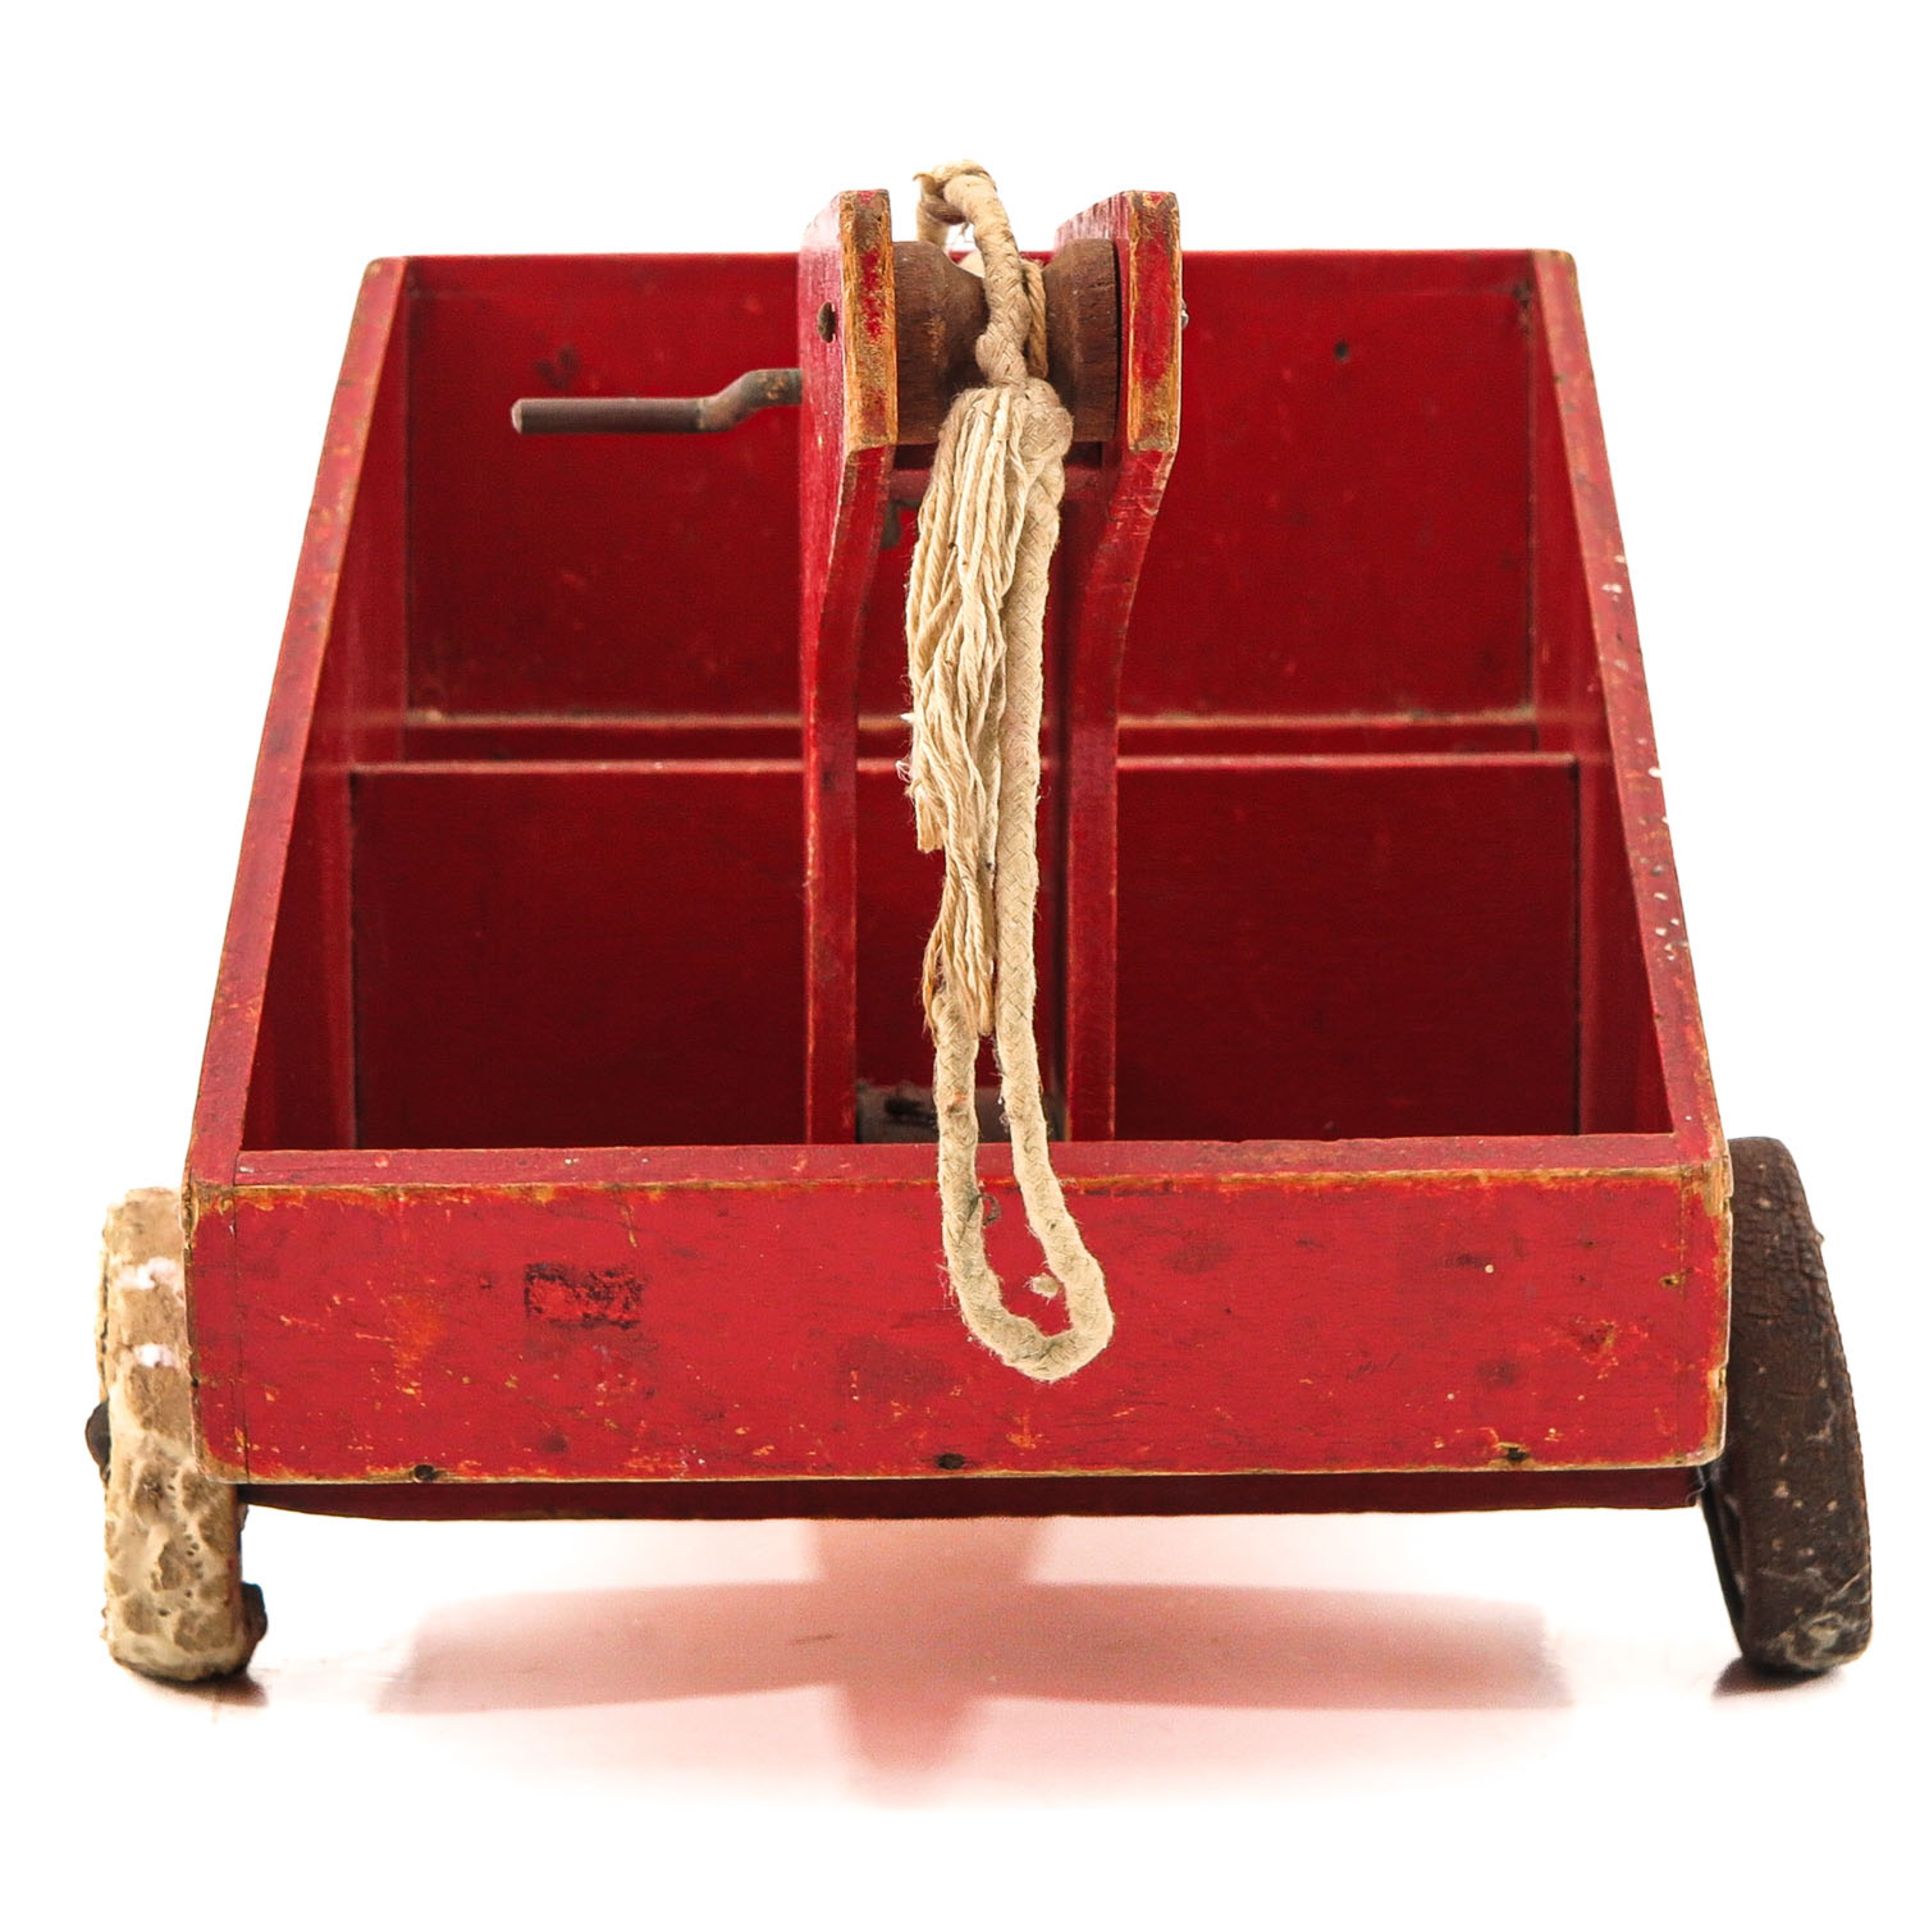 An ADO Wood Toy Truck - Image 2 of 10